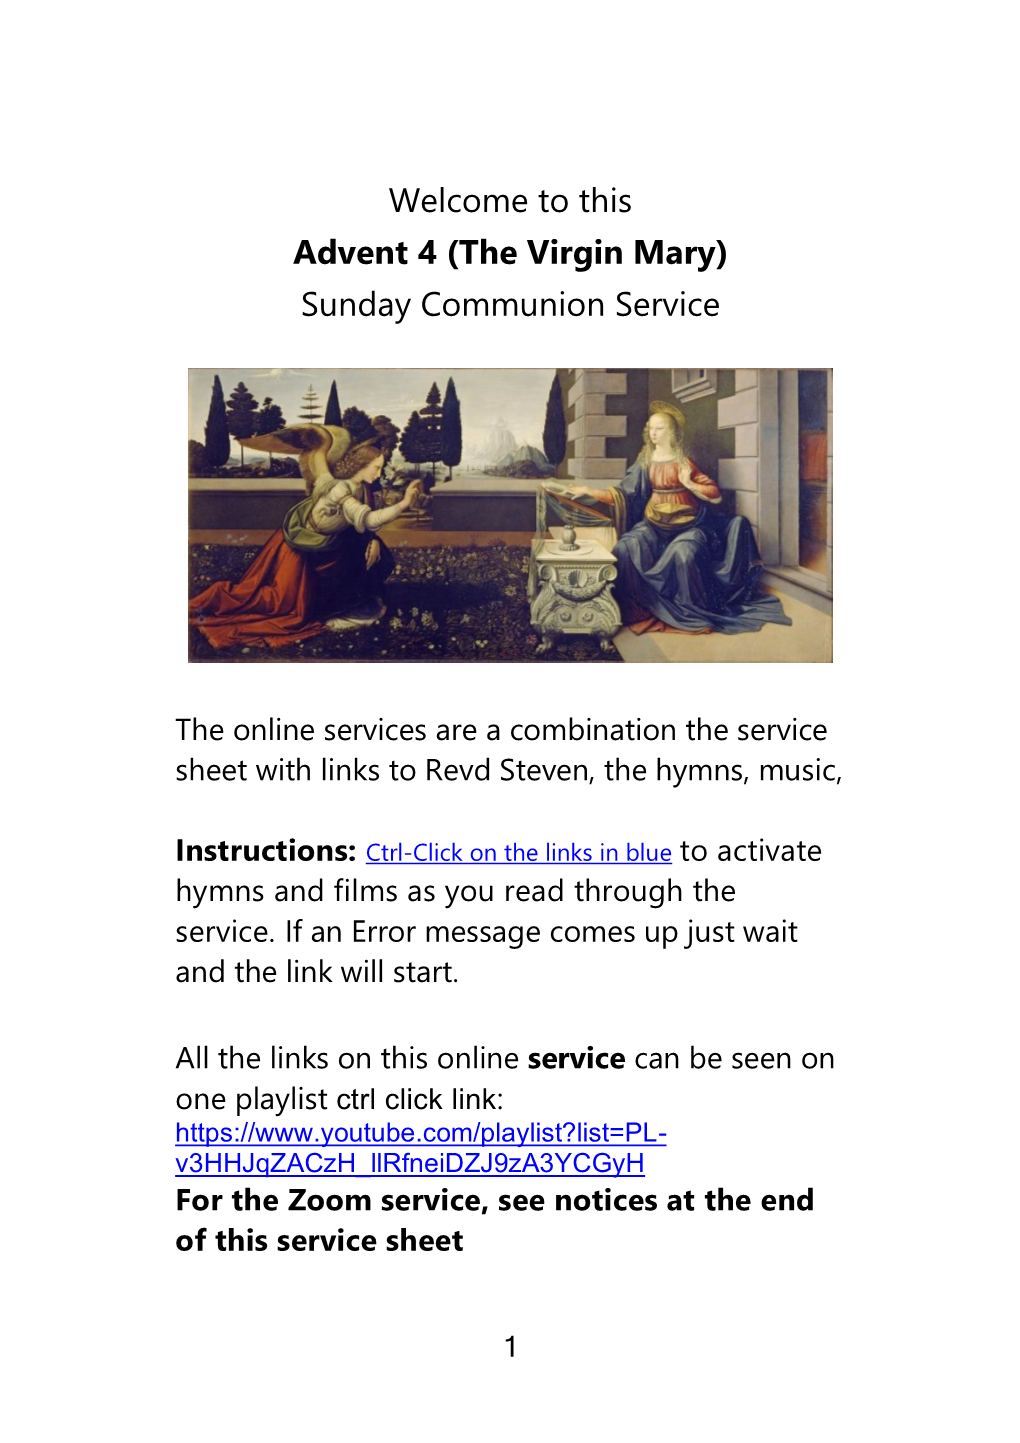 This Advent 4 (The Virgin Mary) Sunday Communion Service